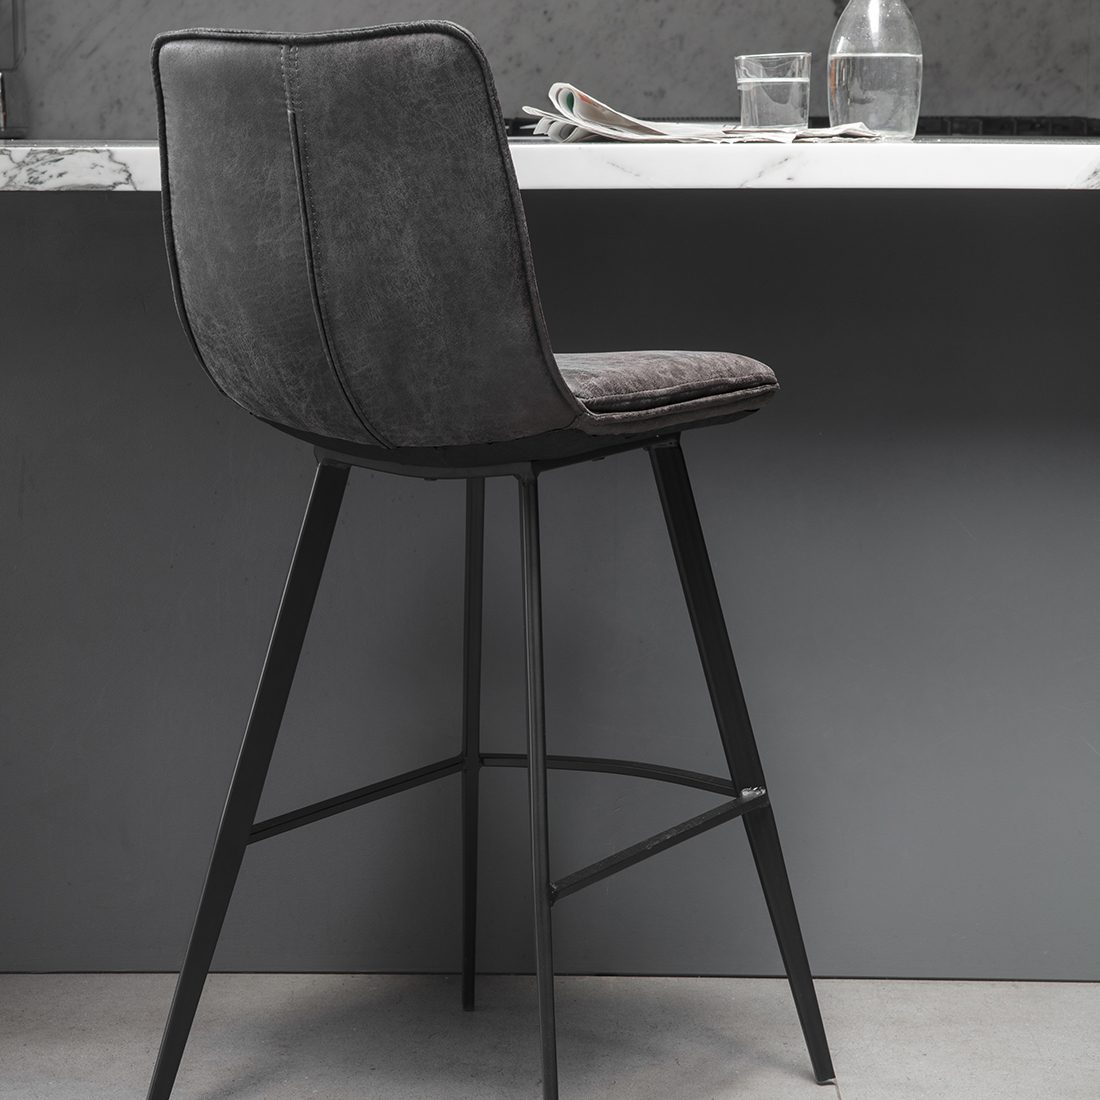 Vintage Grey Faux Leather Bar Stool, Grey Leather Bar Stools With Arms